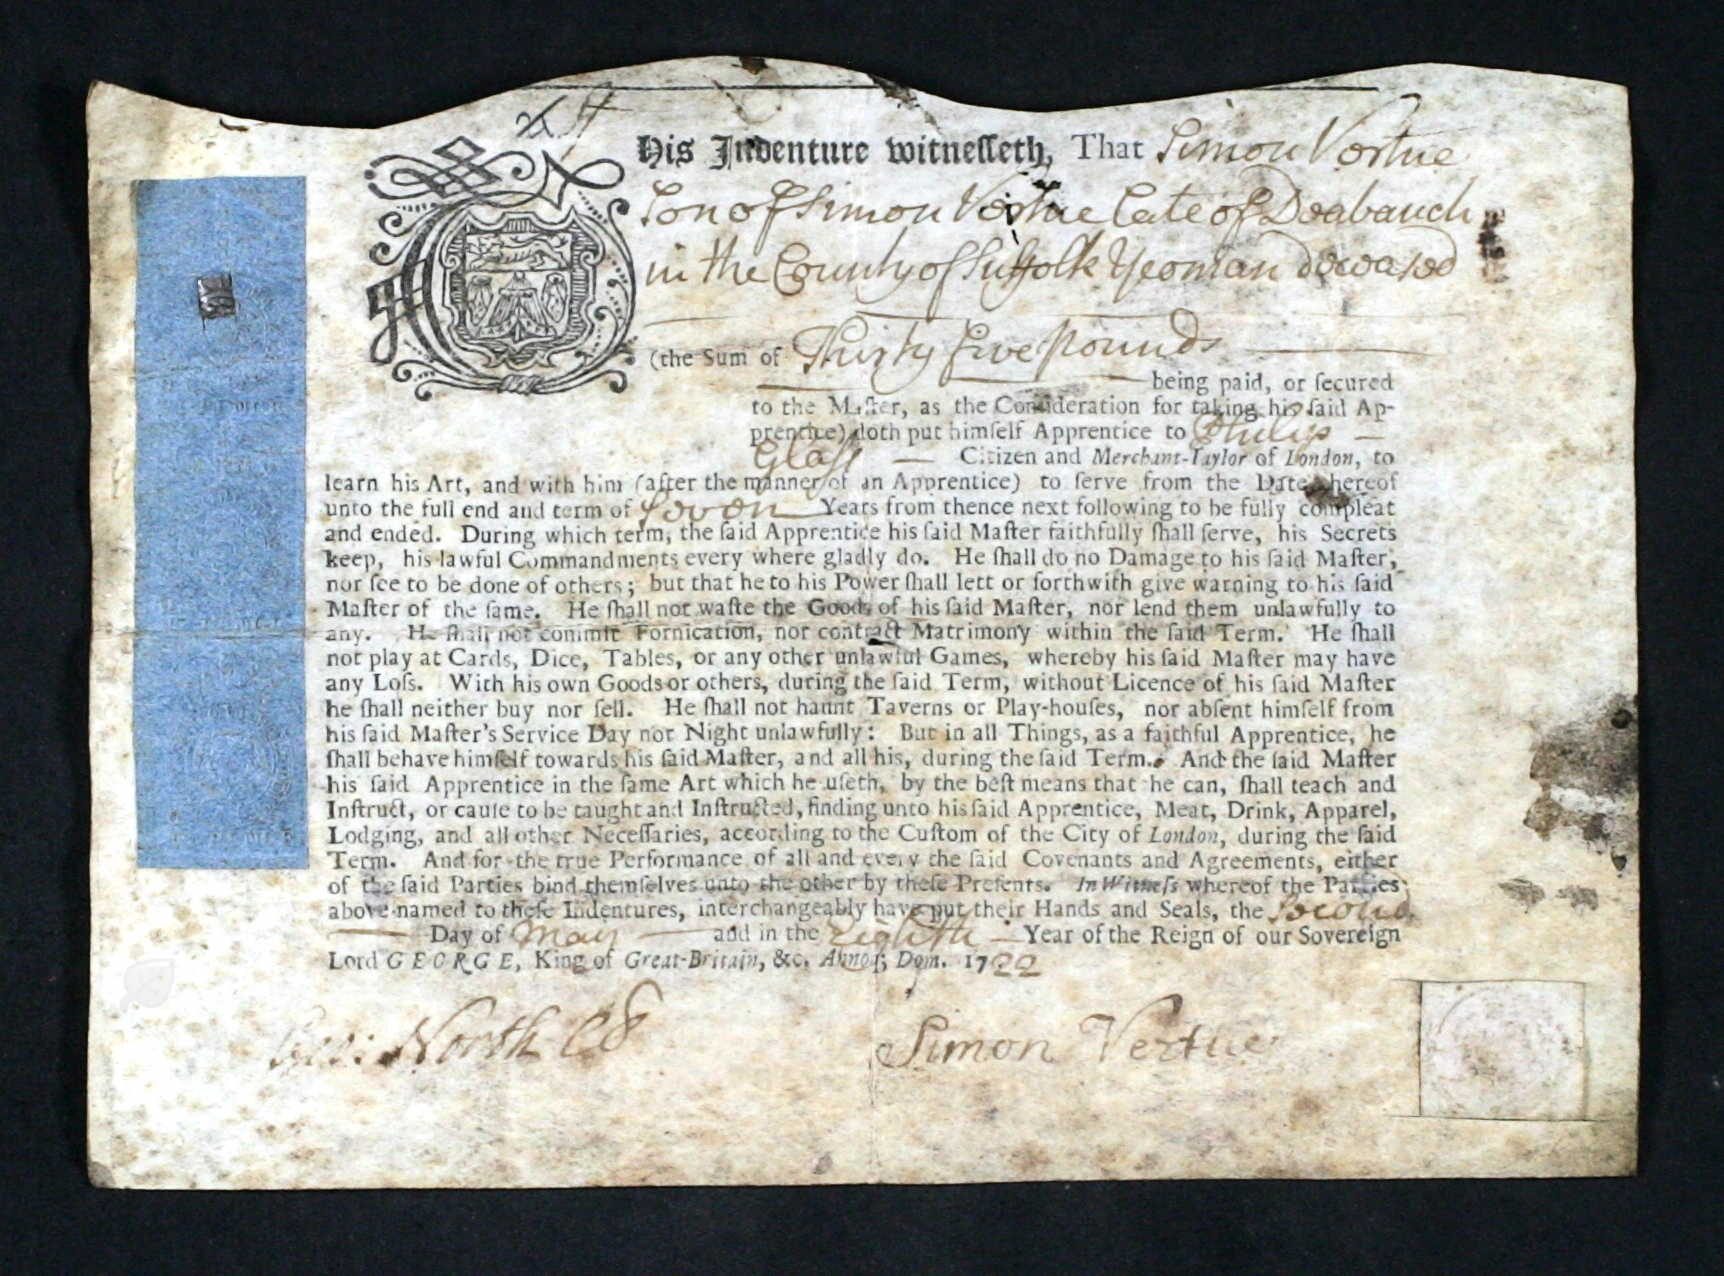 Simon Vertue paid £35, a large sum on 2nd May 1722, for his apprenticeship to merchant taylor Philip Glass